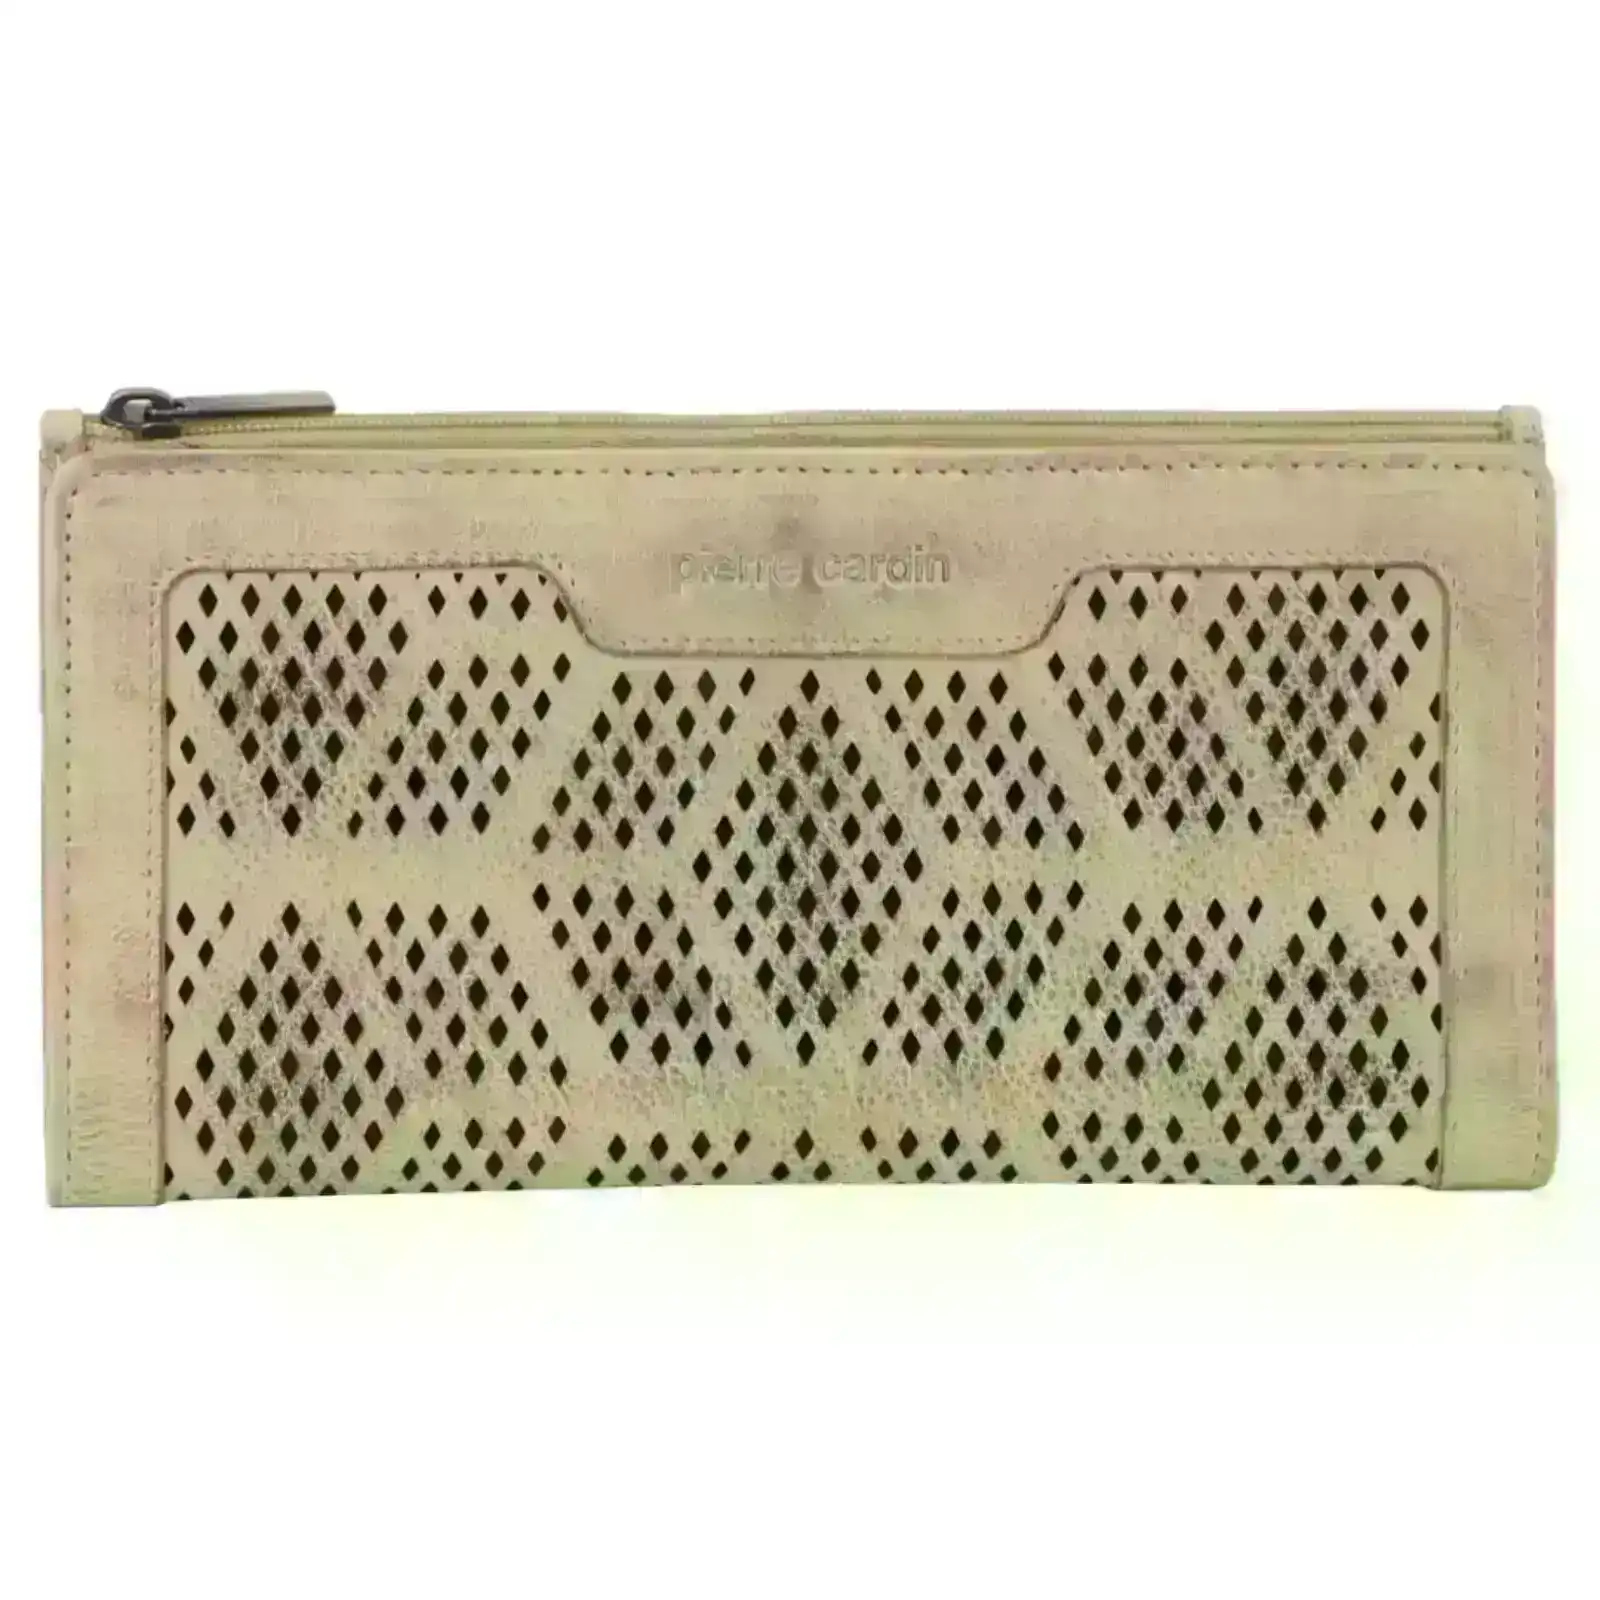 Pierre Cardin Perforated Leather Ladies Handy Travel Wallet - Latte